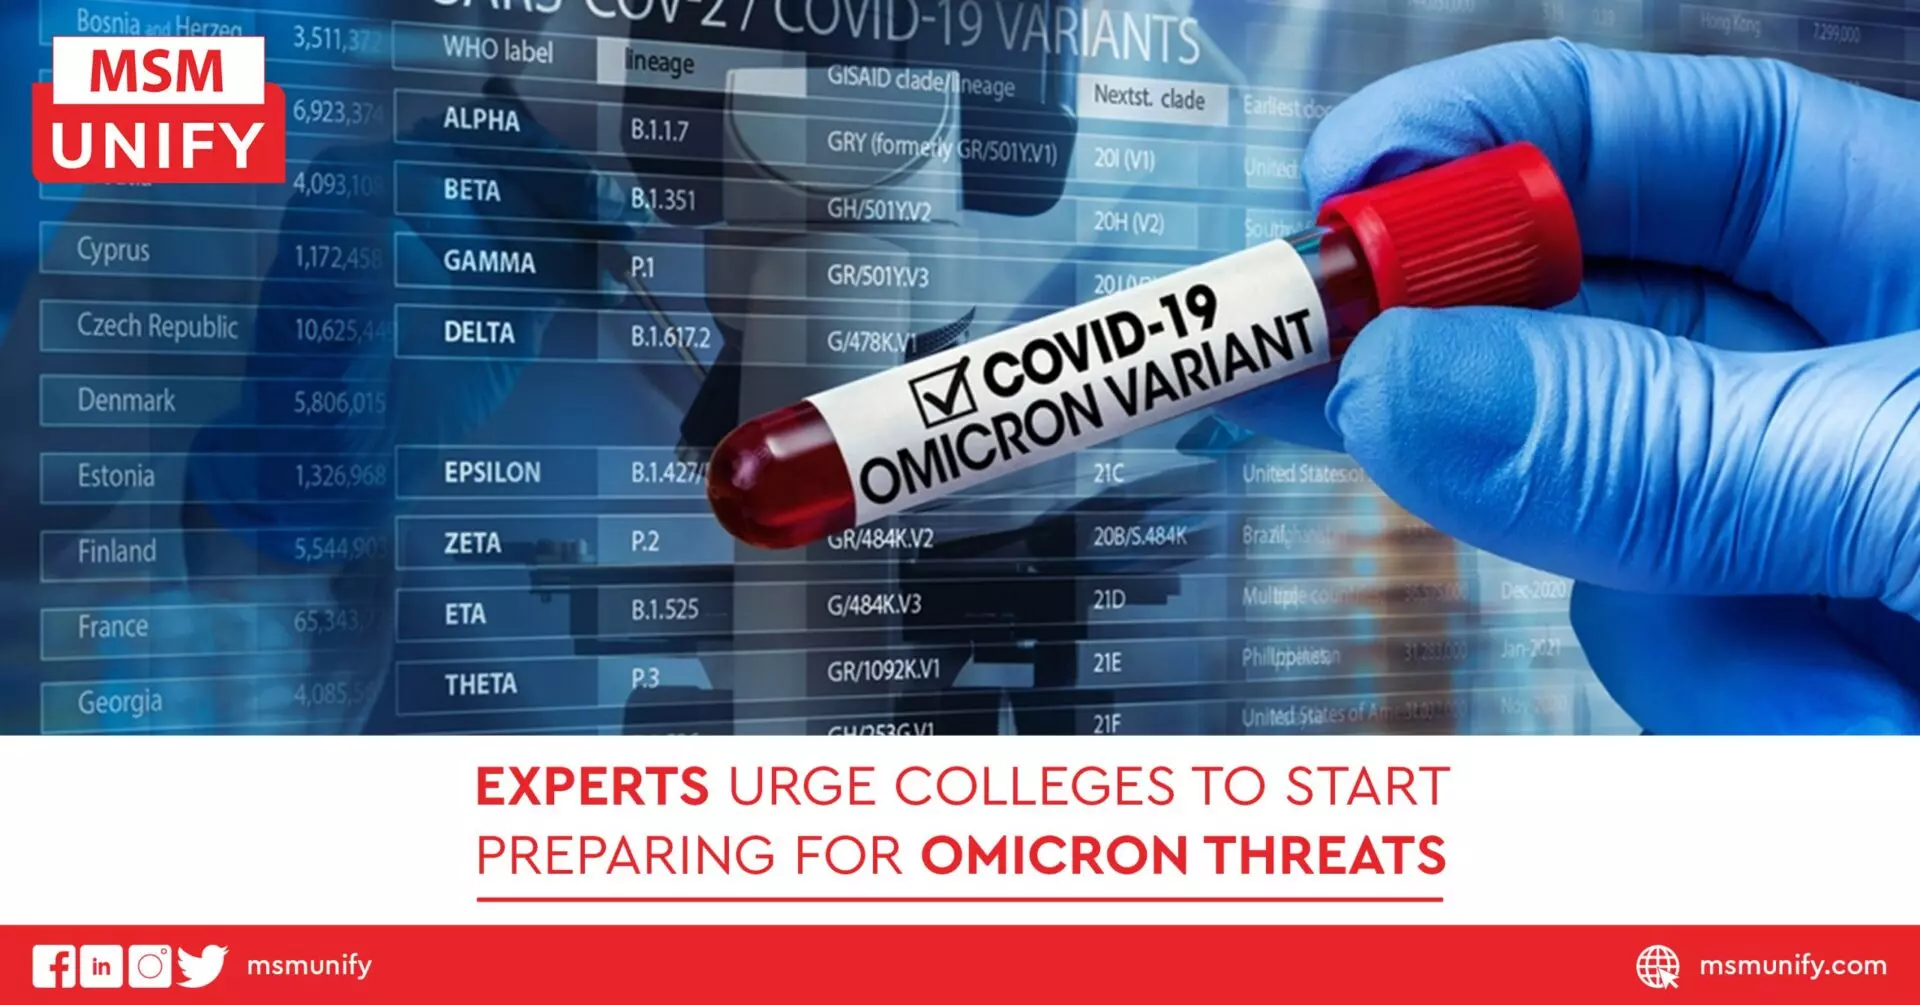 Experts Urge Colleges To Start Preparing for Omicron Threats scaled 1